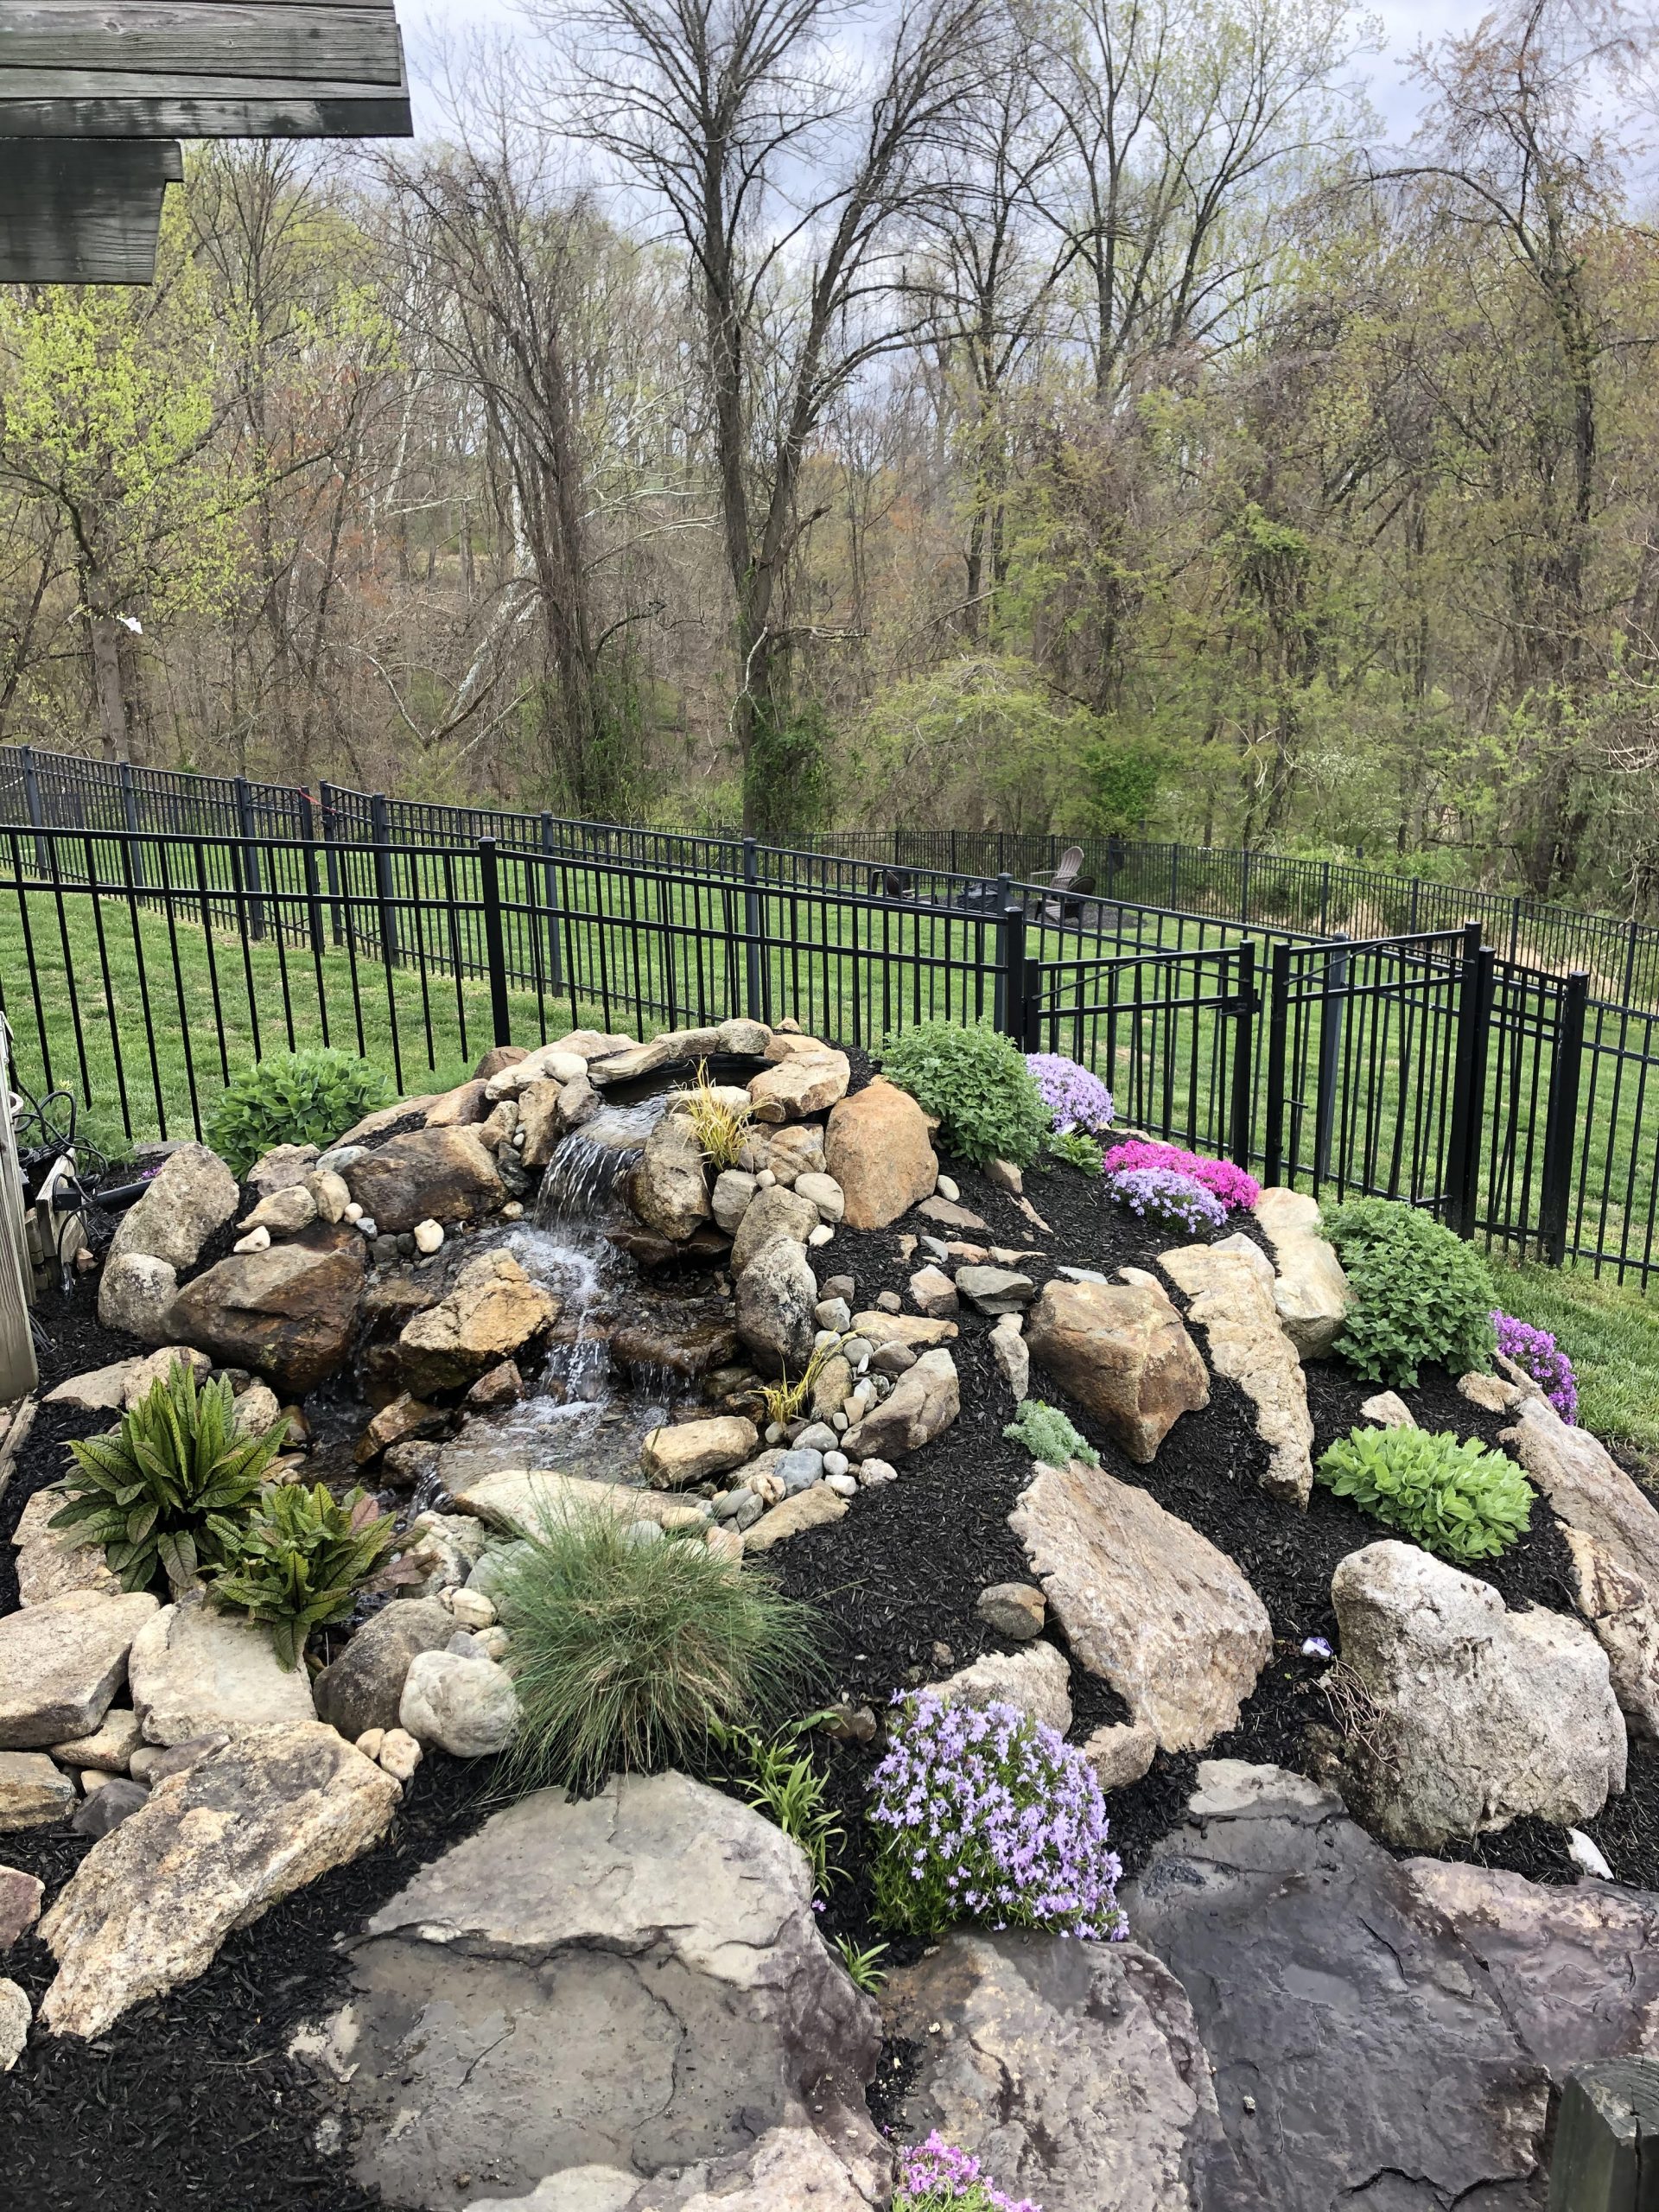 Paoli, PA Residential & Commercial Landscaping Services. Best Residential & Commercial Landscaping Contractor in Paoli, PA. Professional Landscape Designer